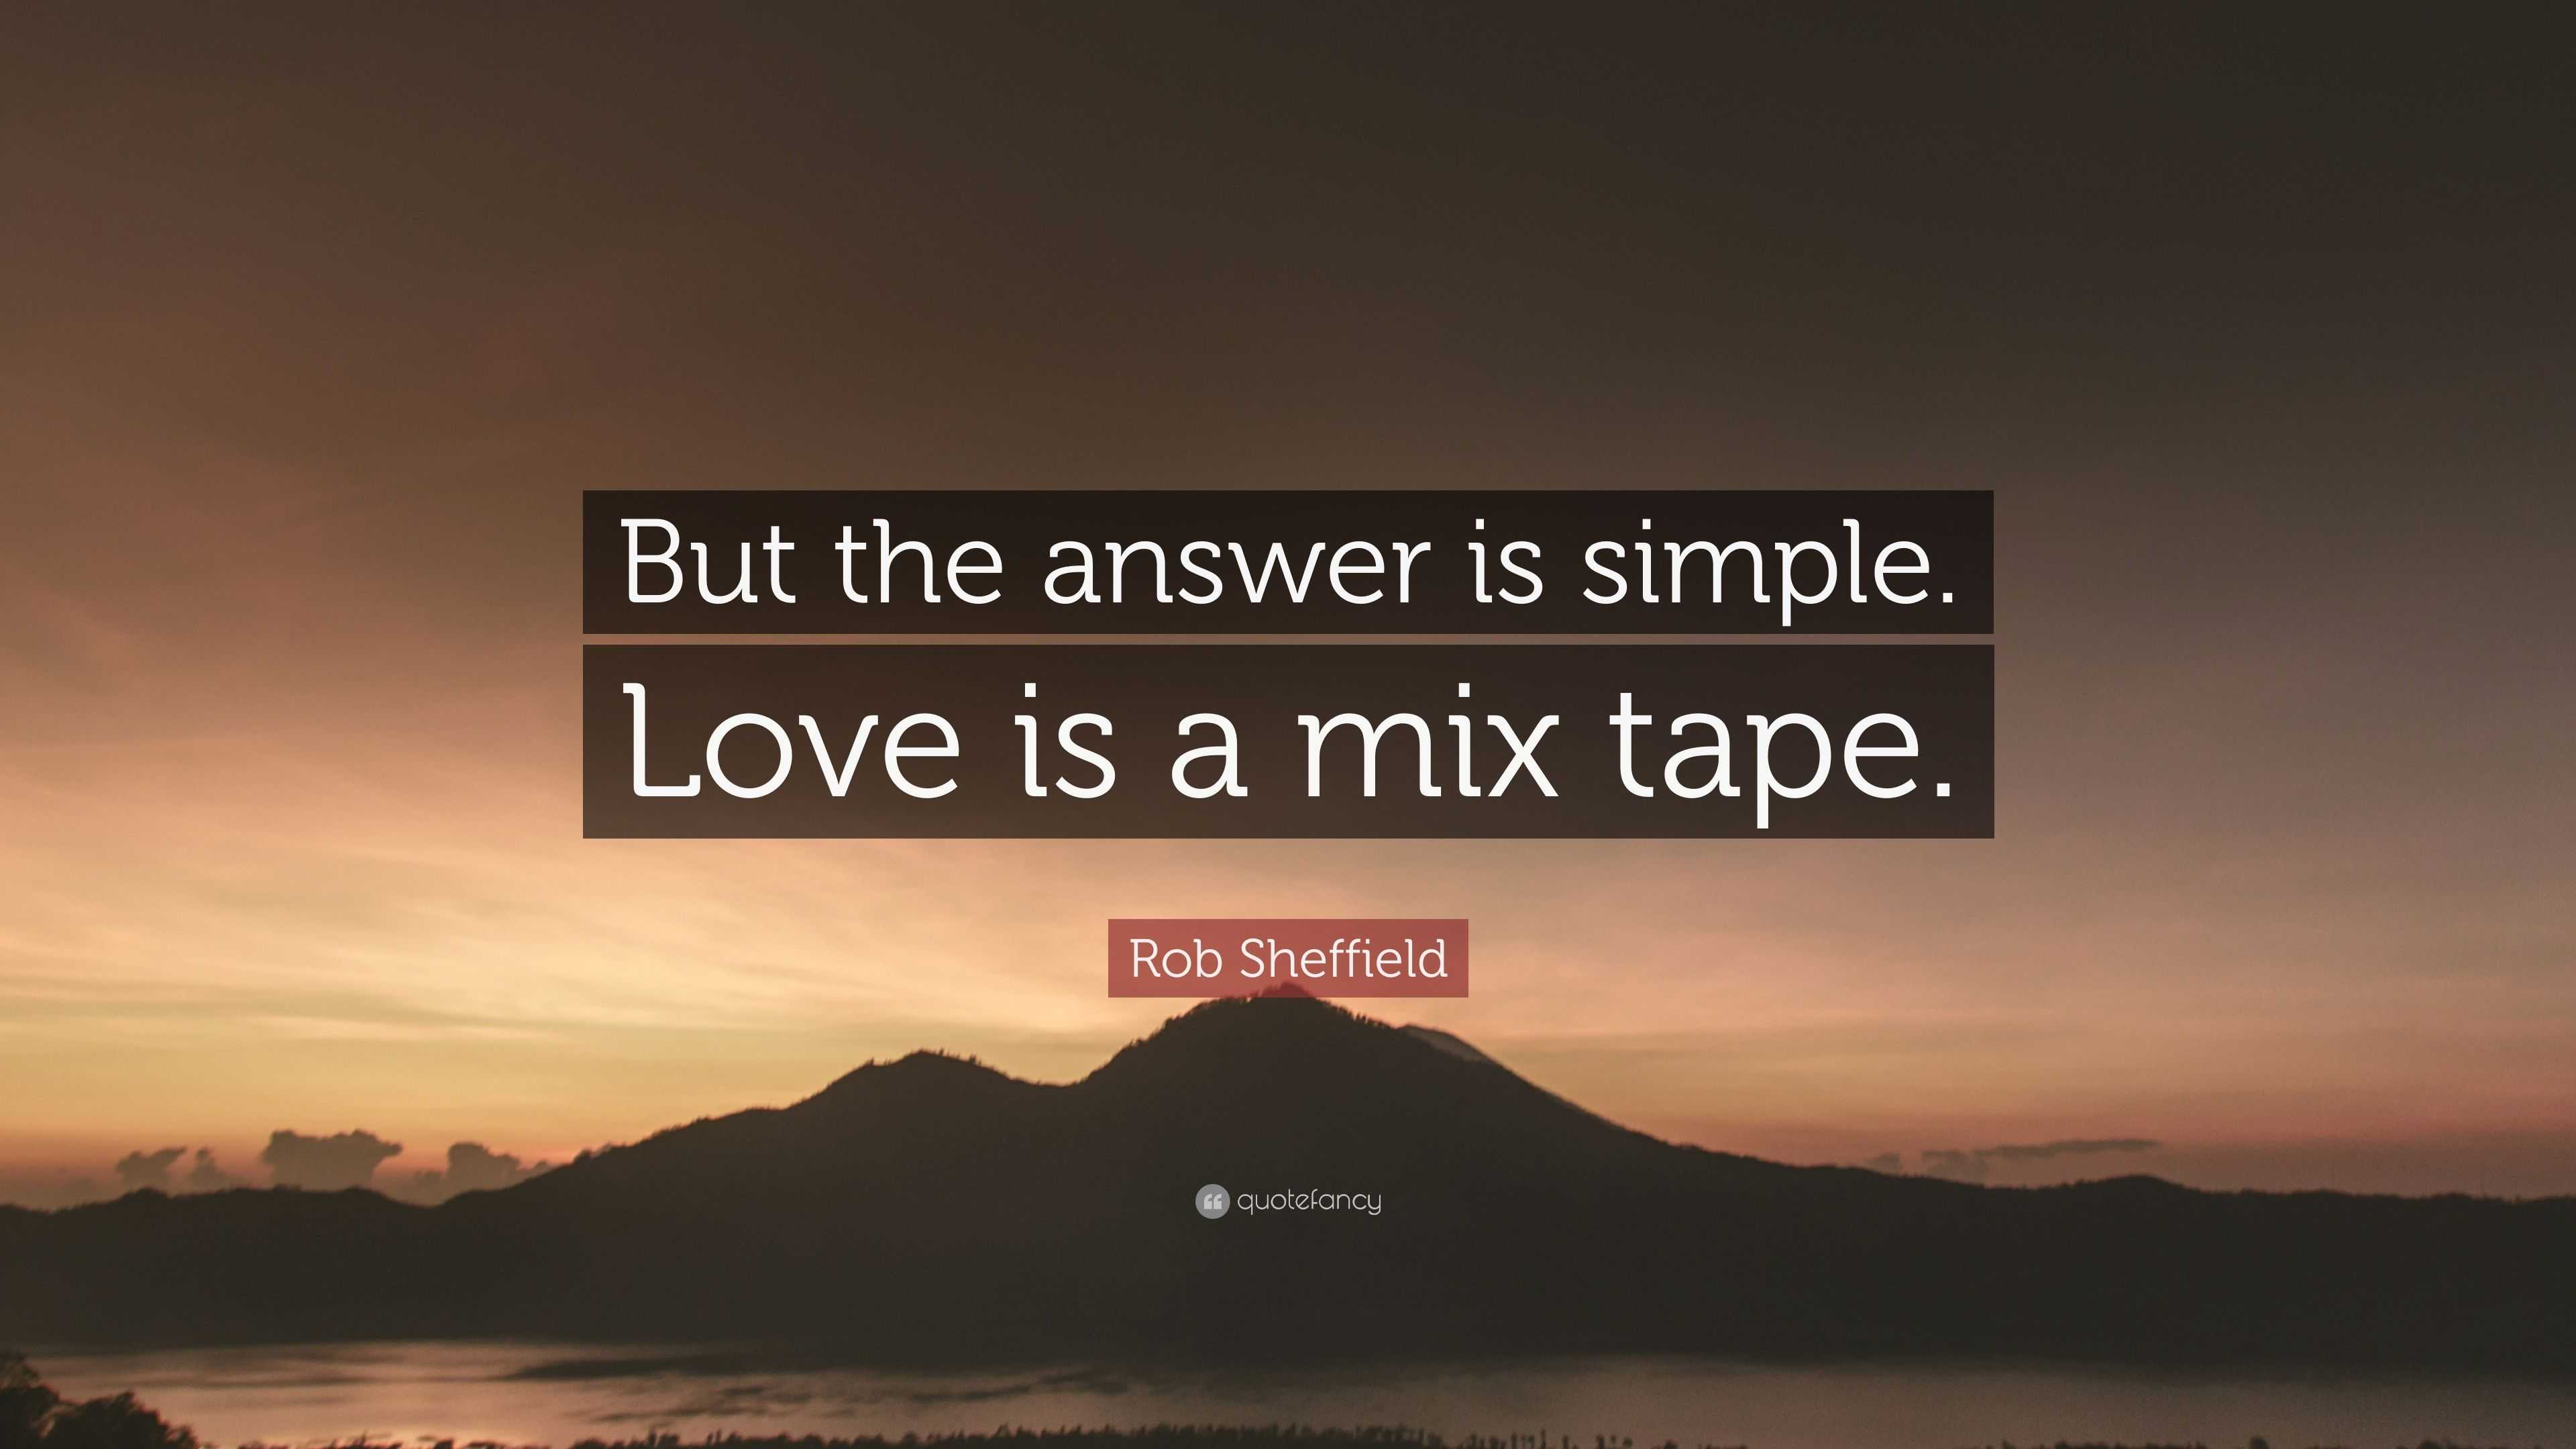 love is a mix tape by rob sheffield